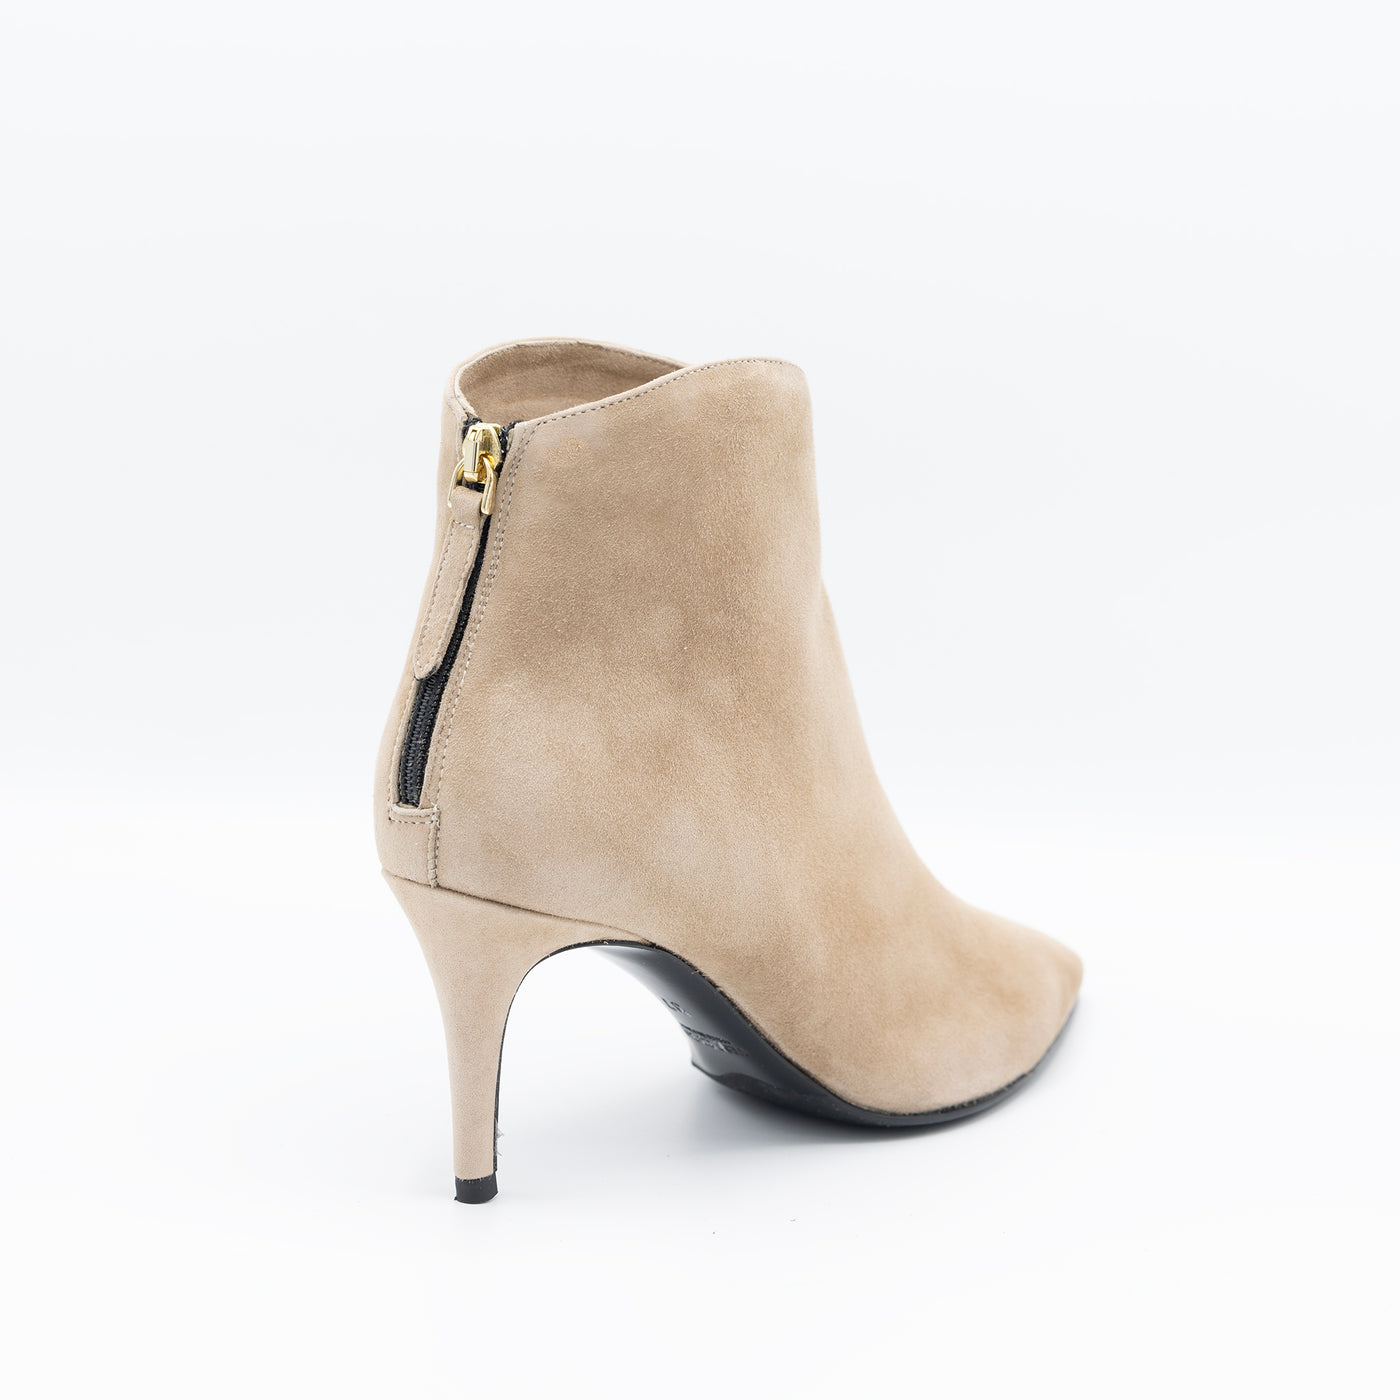 Beige suede ankle boots with rounded saft, pointy heel and stiletto heel. 